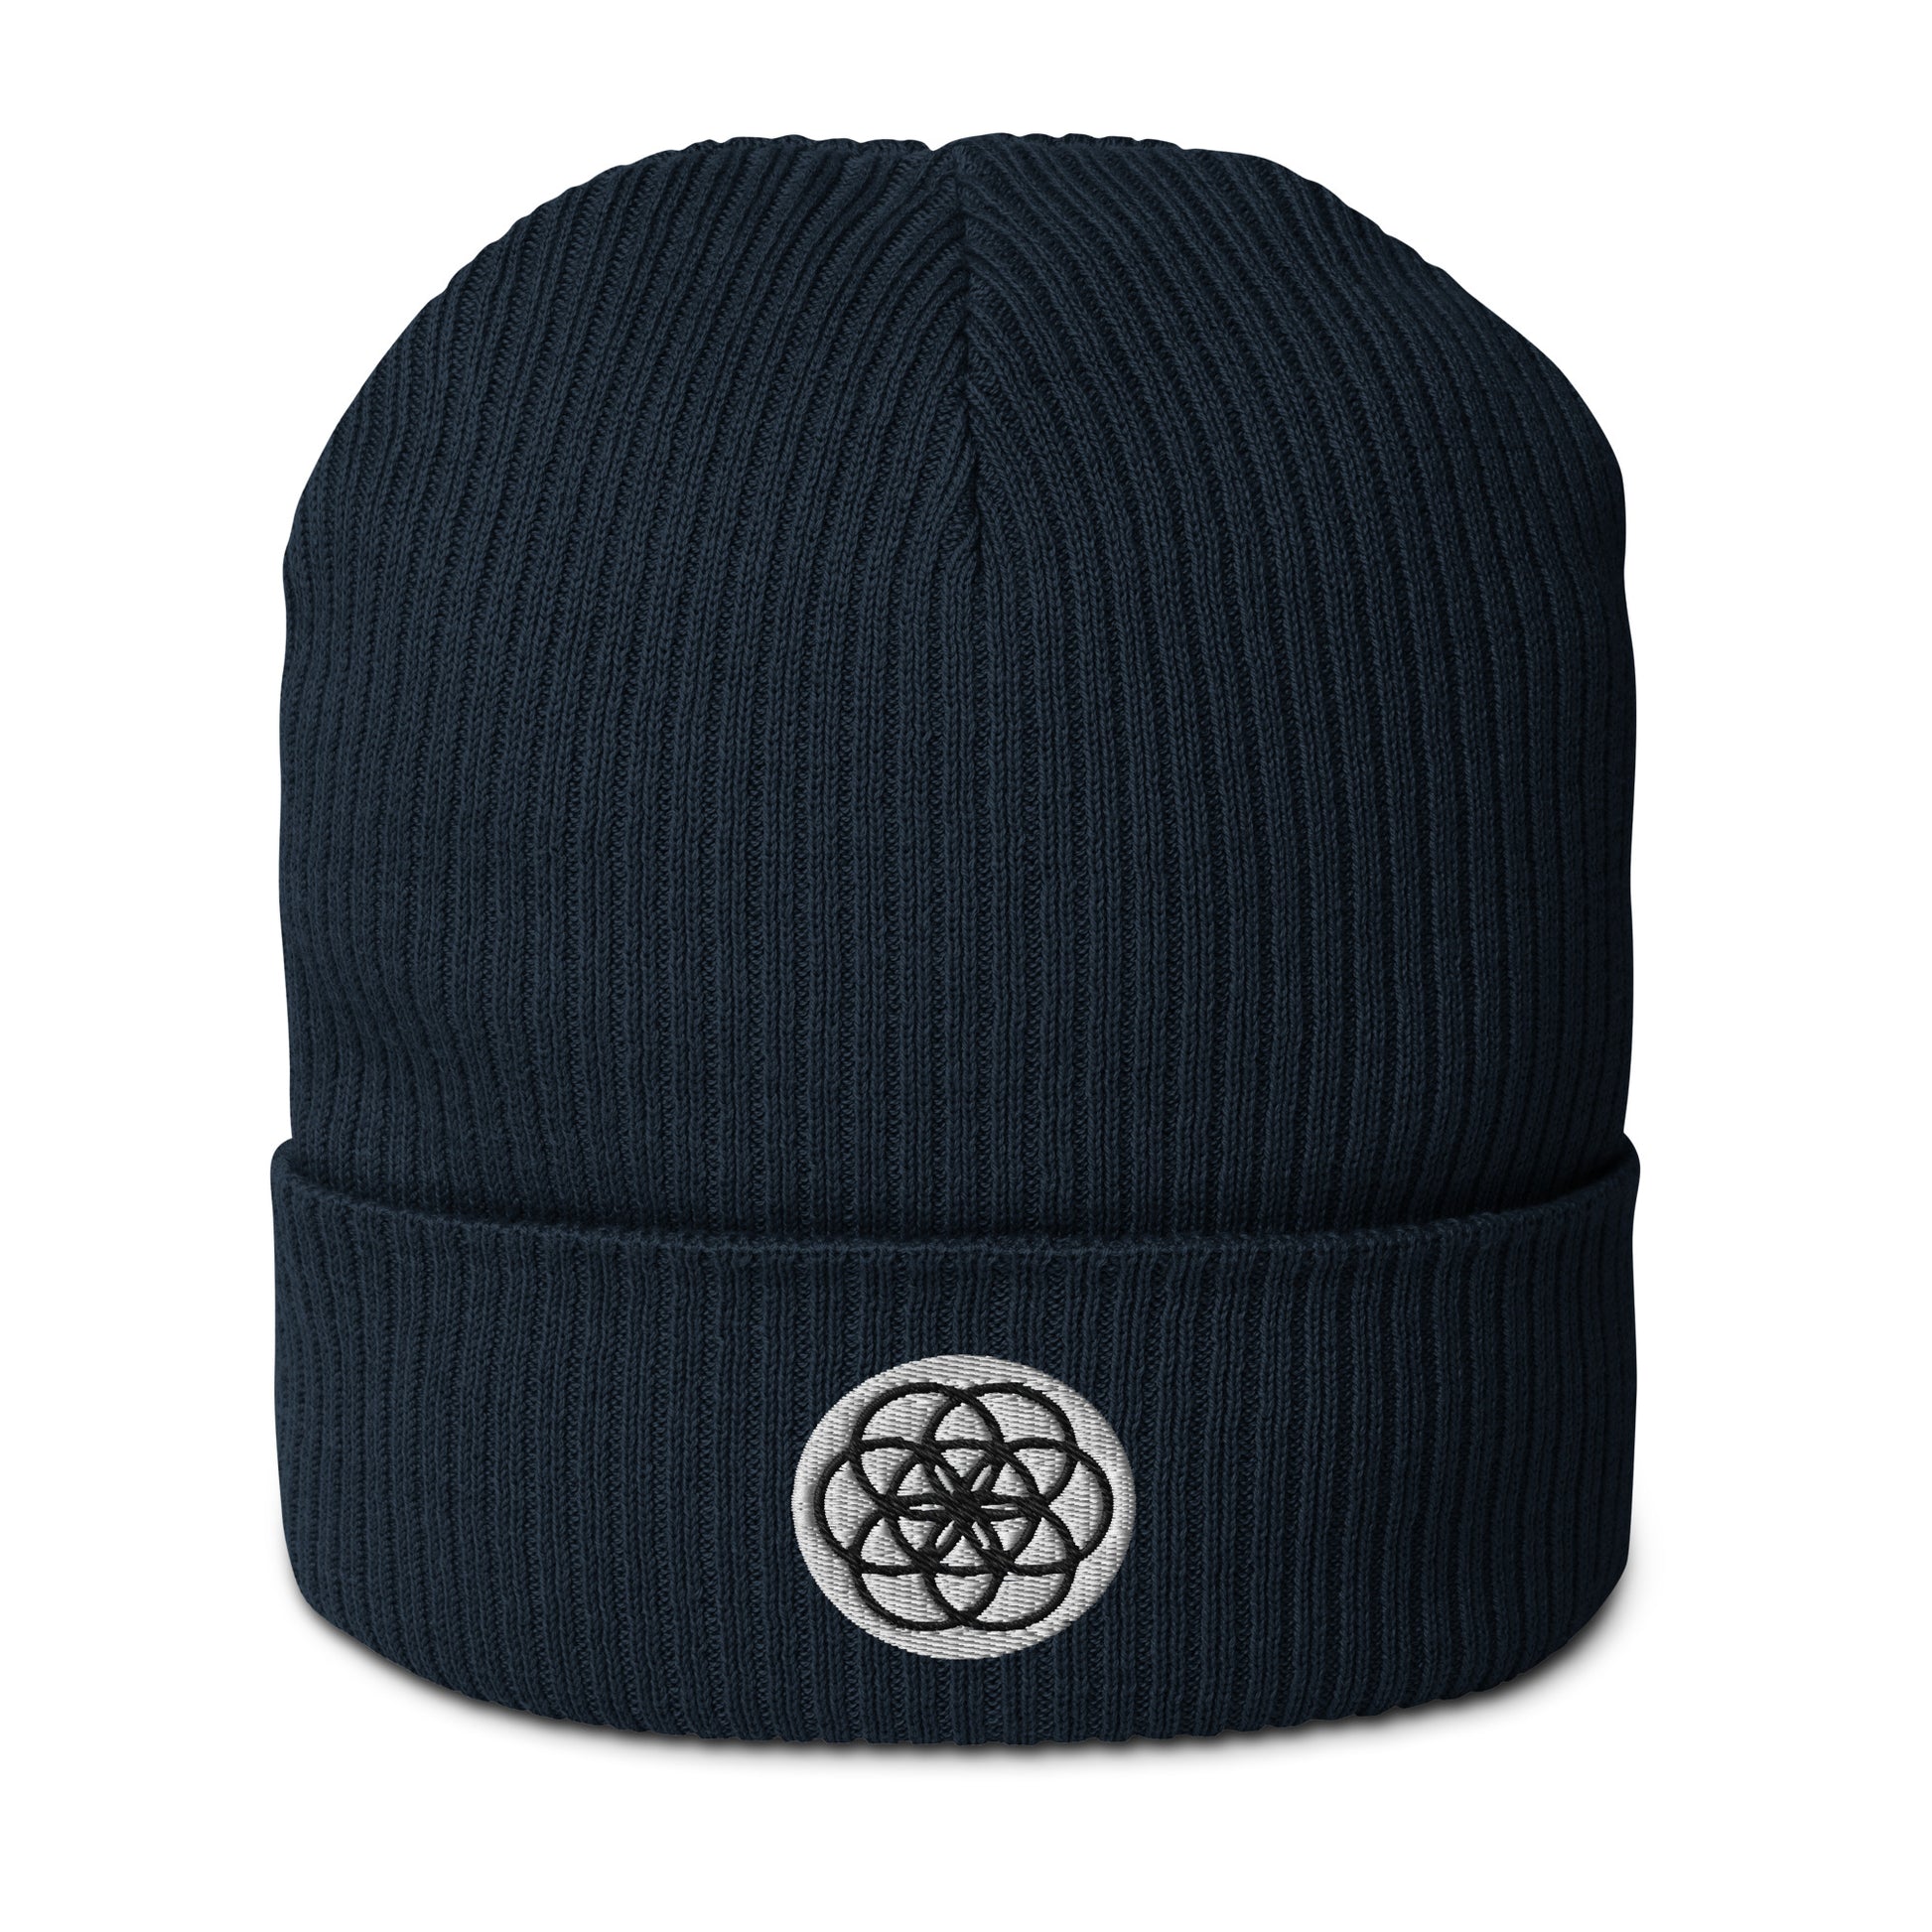 The Seed of Life beanie in Oxford Navy is made from 100% organic cotton and it’s the perfect cozy addition to your energetically elevated wardrobe. The seed of life is an ancient and meaningful sacred geometry symbol that Whether you're stargazing or navigating the urban jungle, let this beanie remind you of your place in the cosmic tapestry.